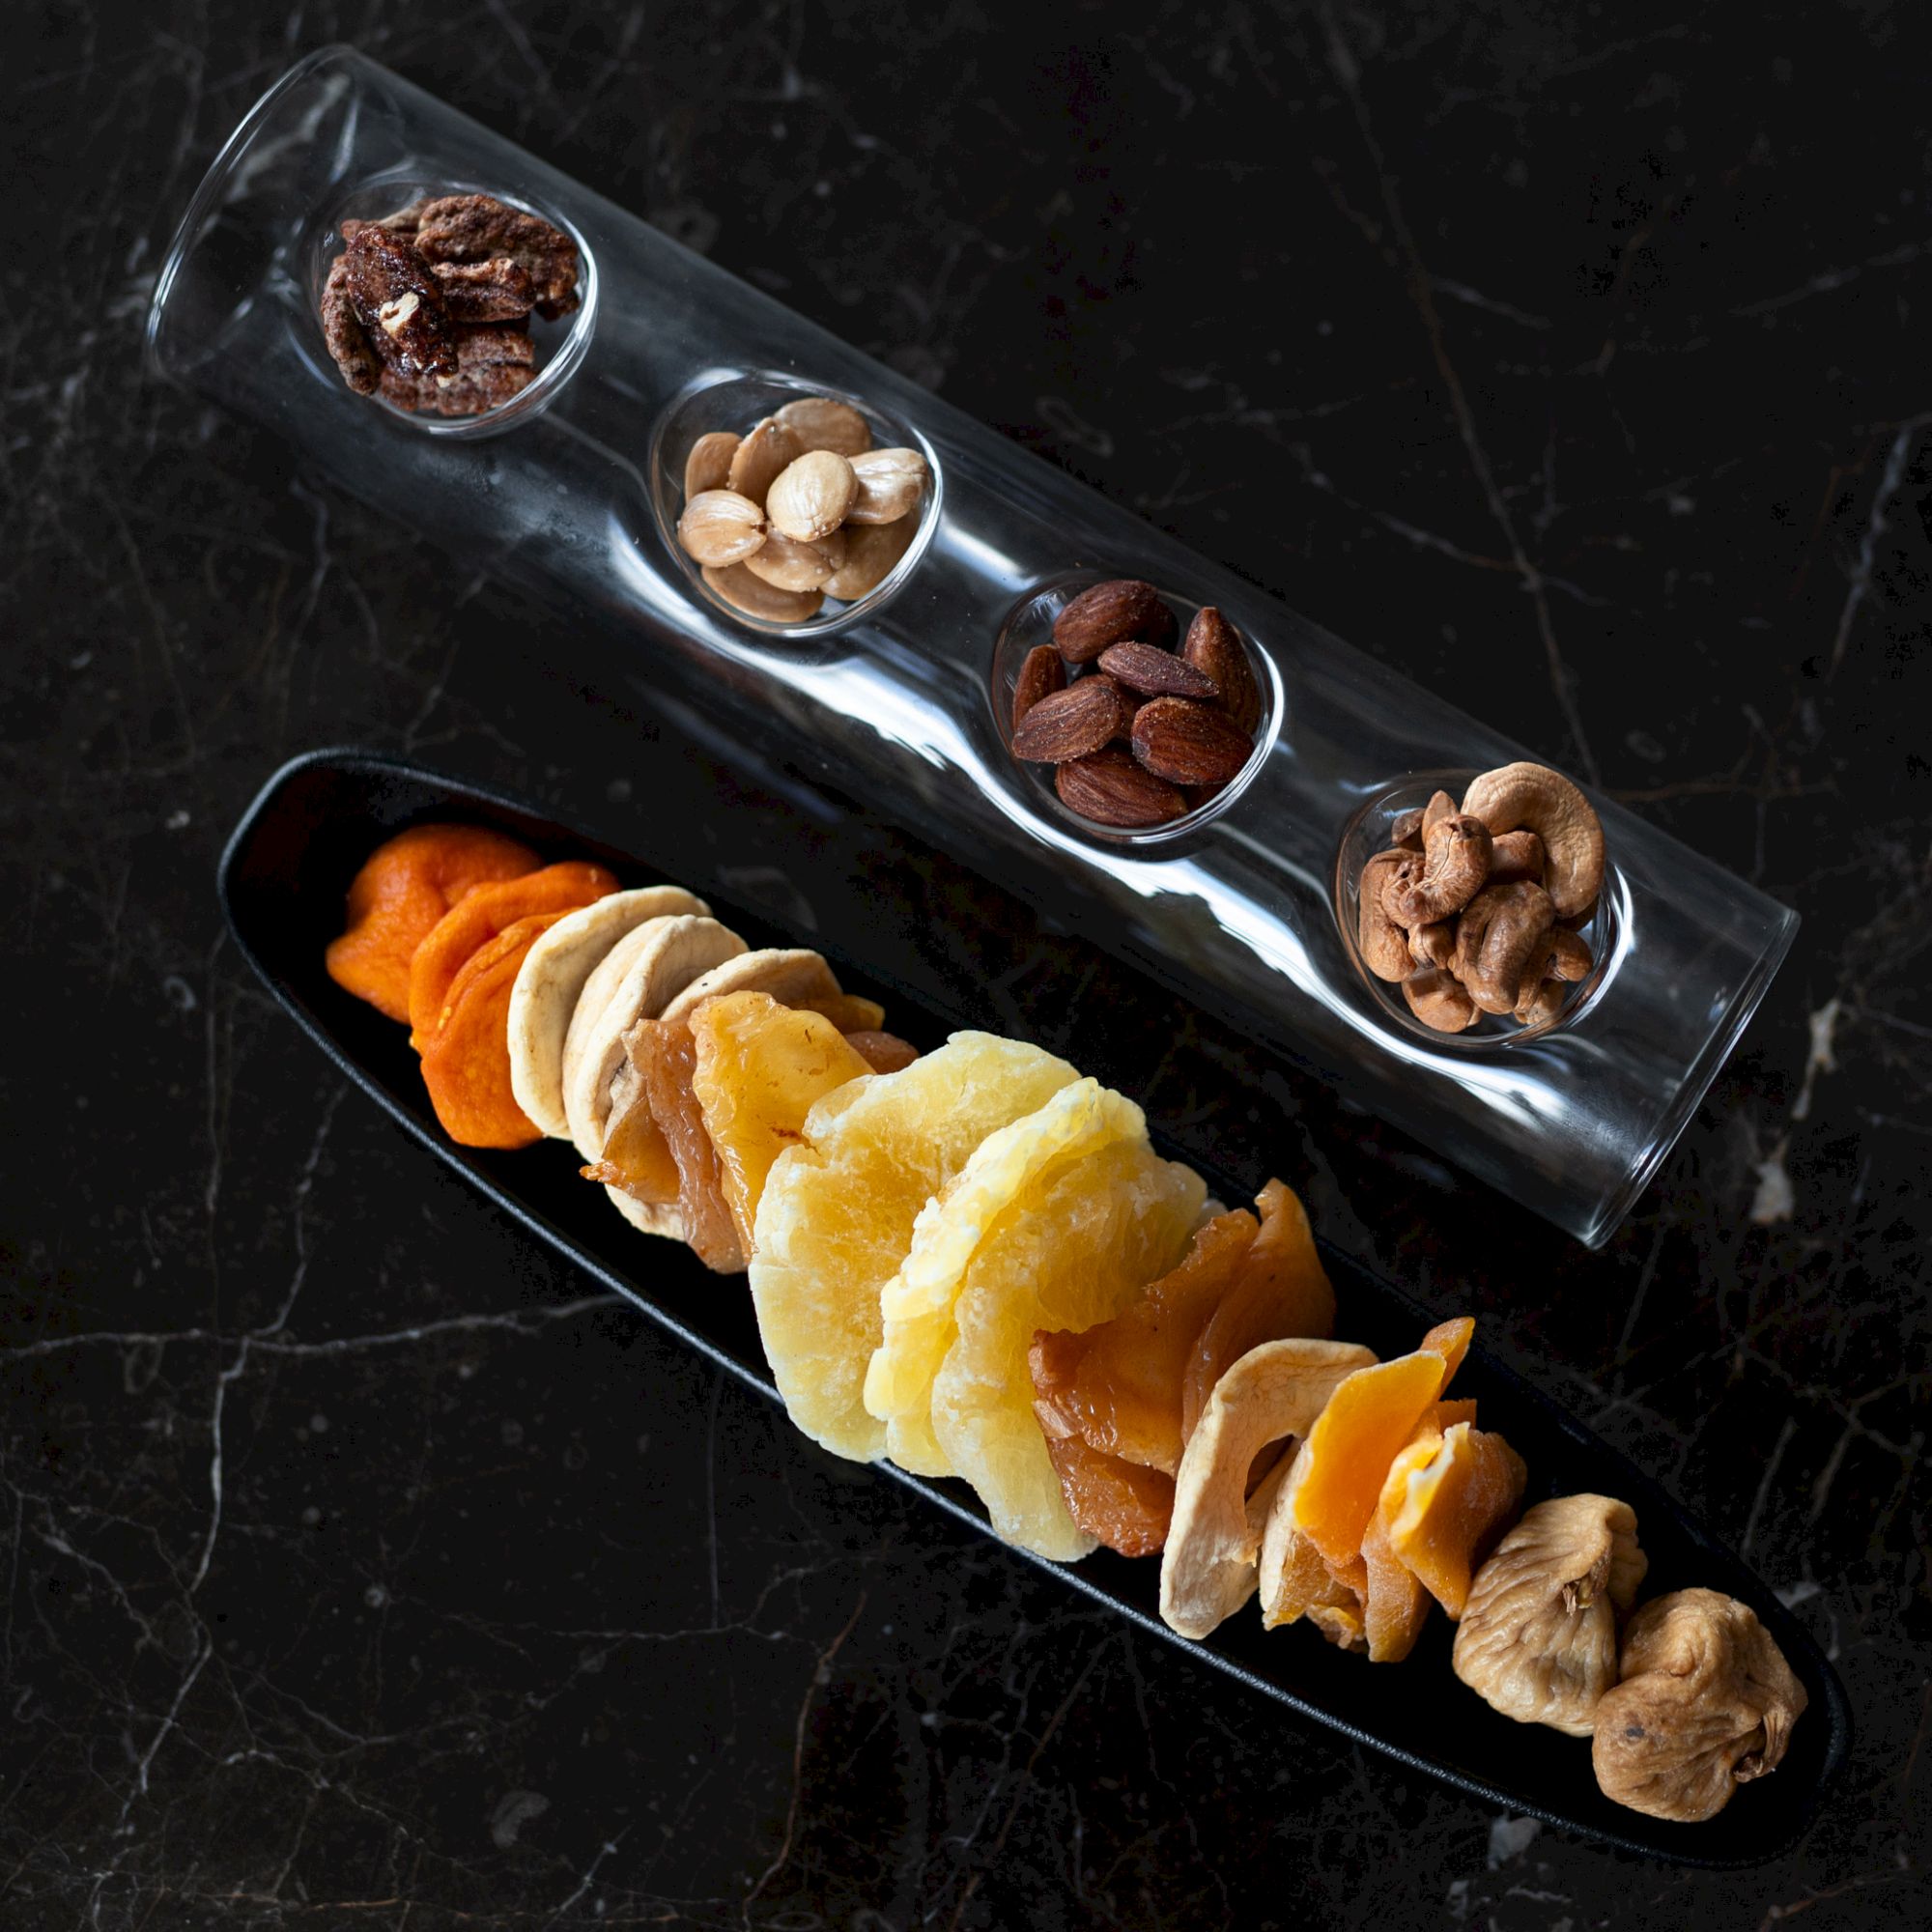 A platter with dried fruits and nuts is shown.